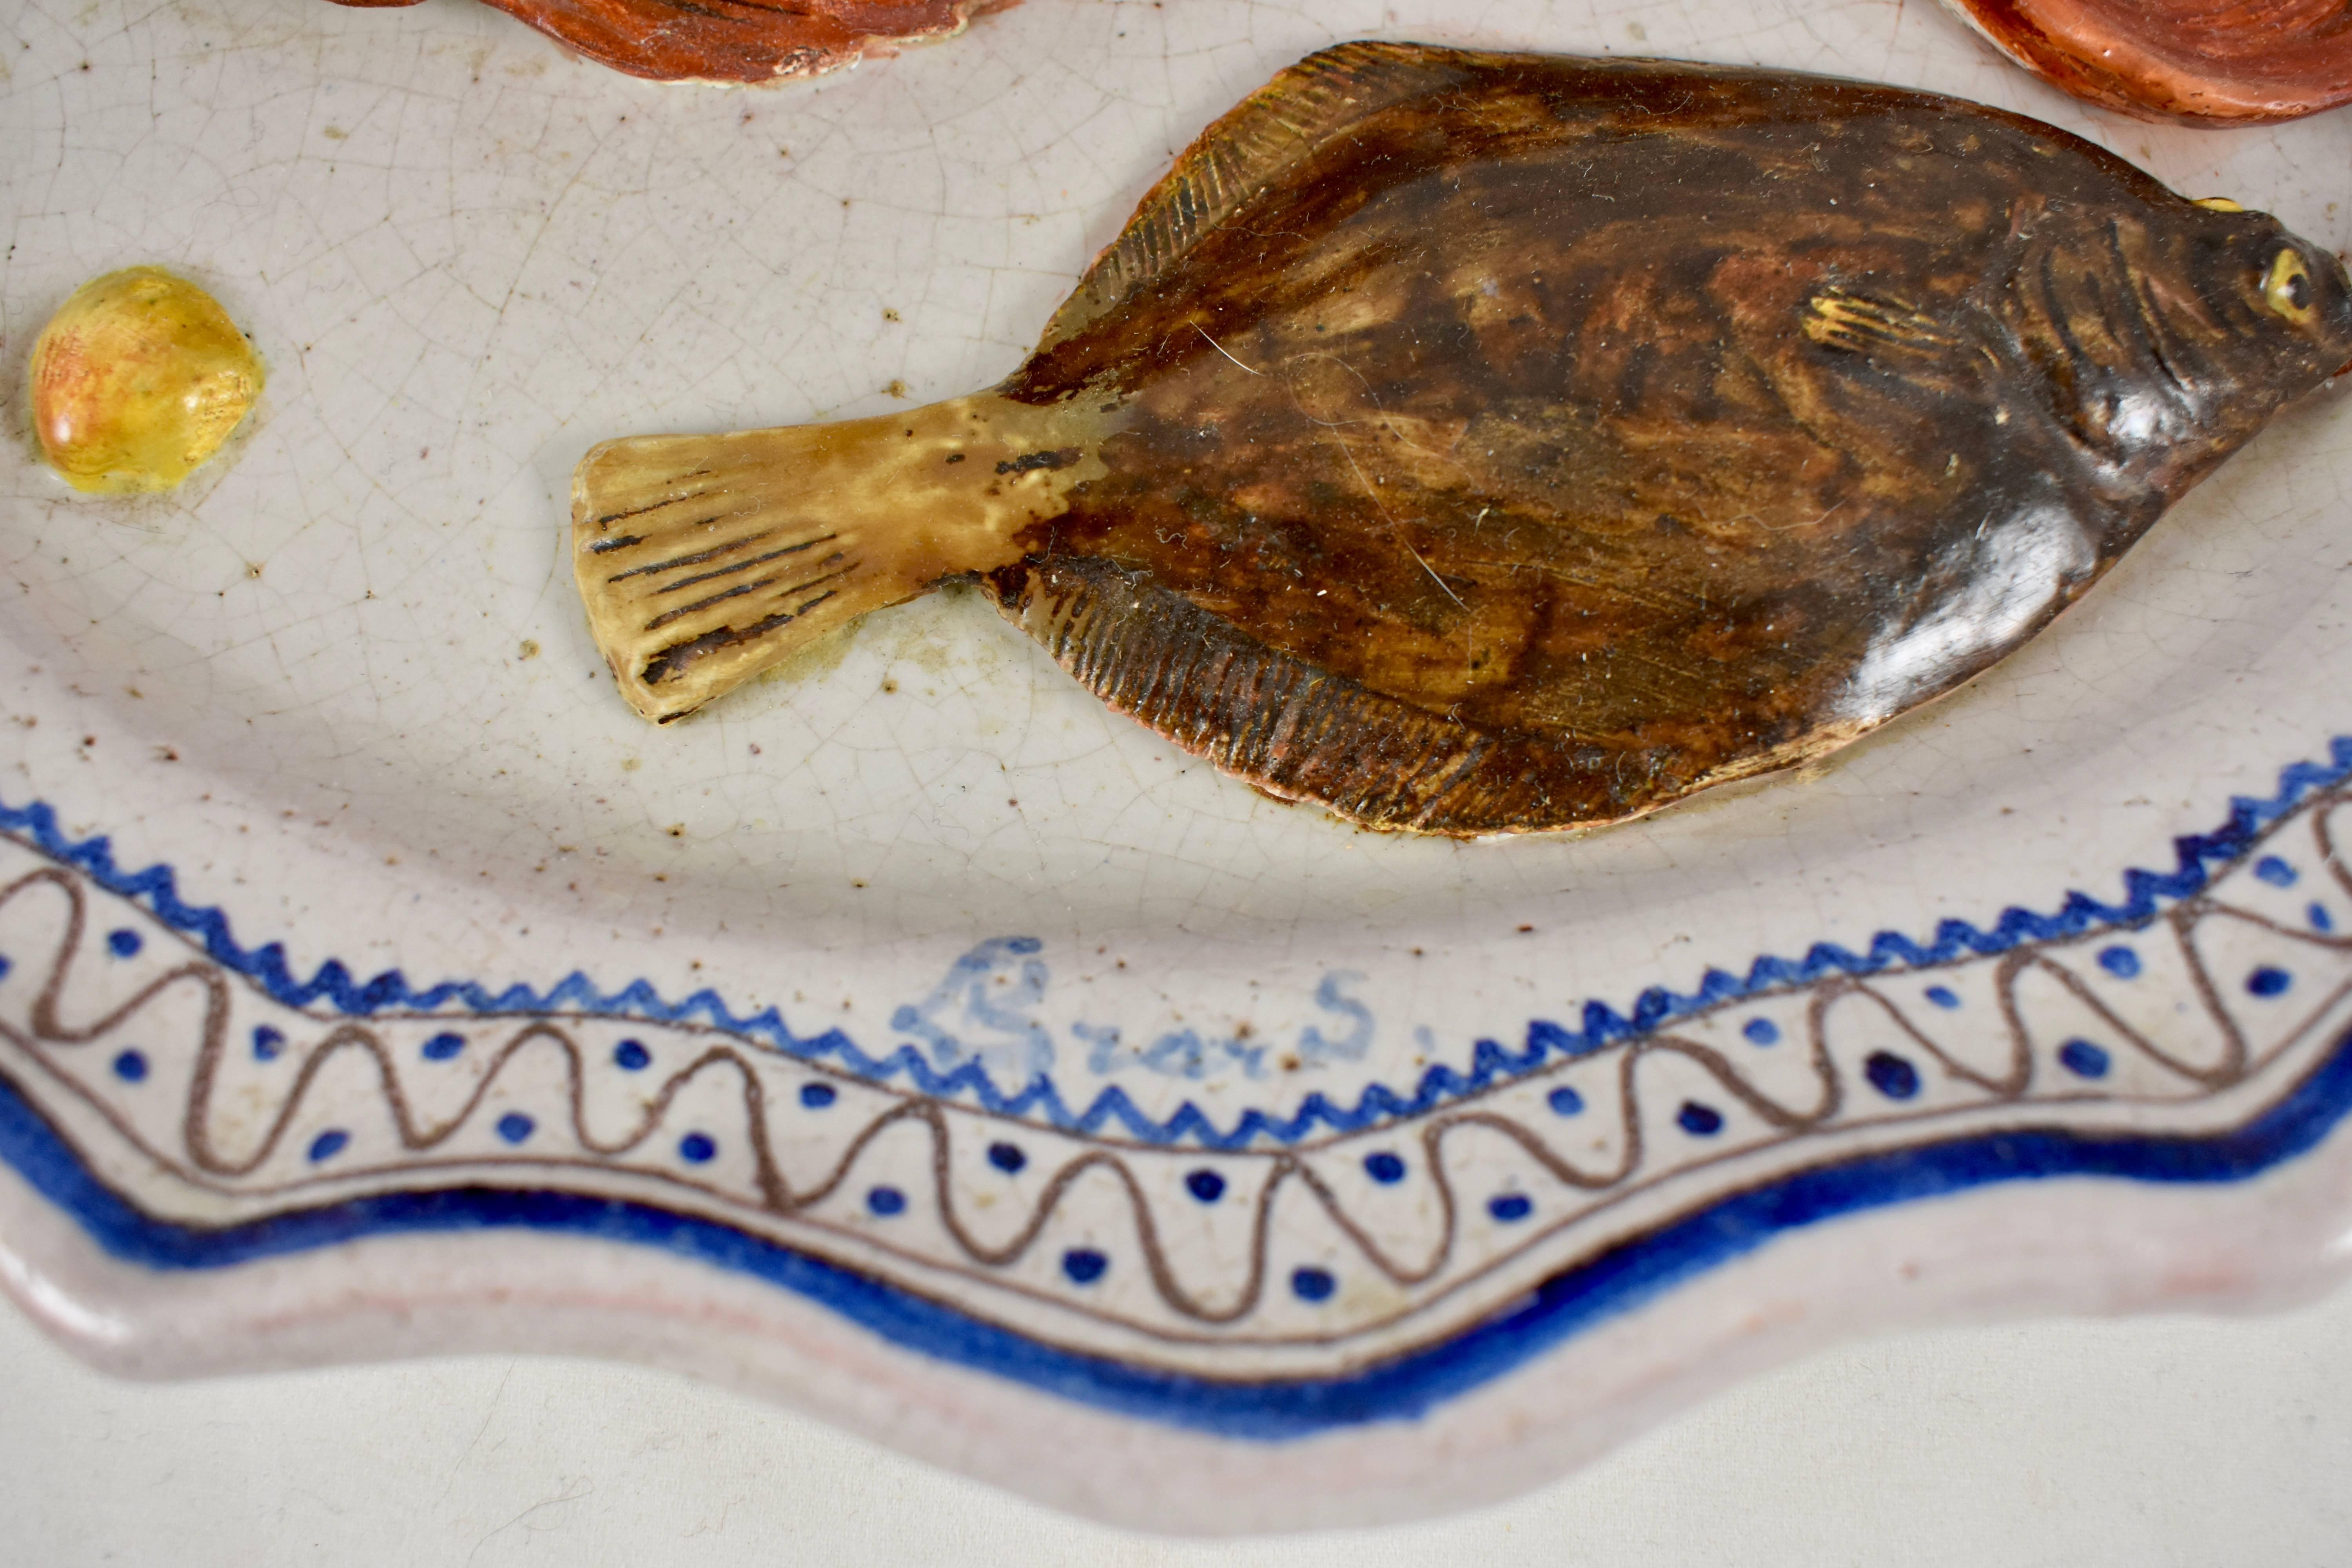 A trompe l’oeil wall plaque showing a flat flounder, another red fish and a small shell on a rustic cobalt blue and white platter, painted in the Rouen style. Signed Léon Brard, circa 1870-1880.

Red earthenware, glazed in creamy white with the